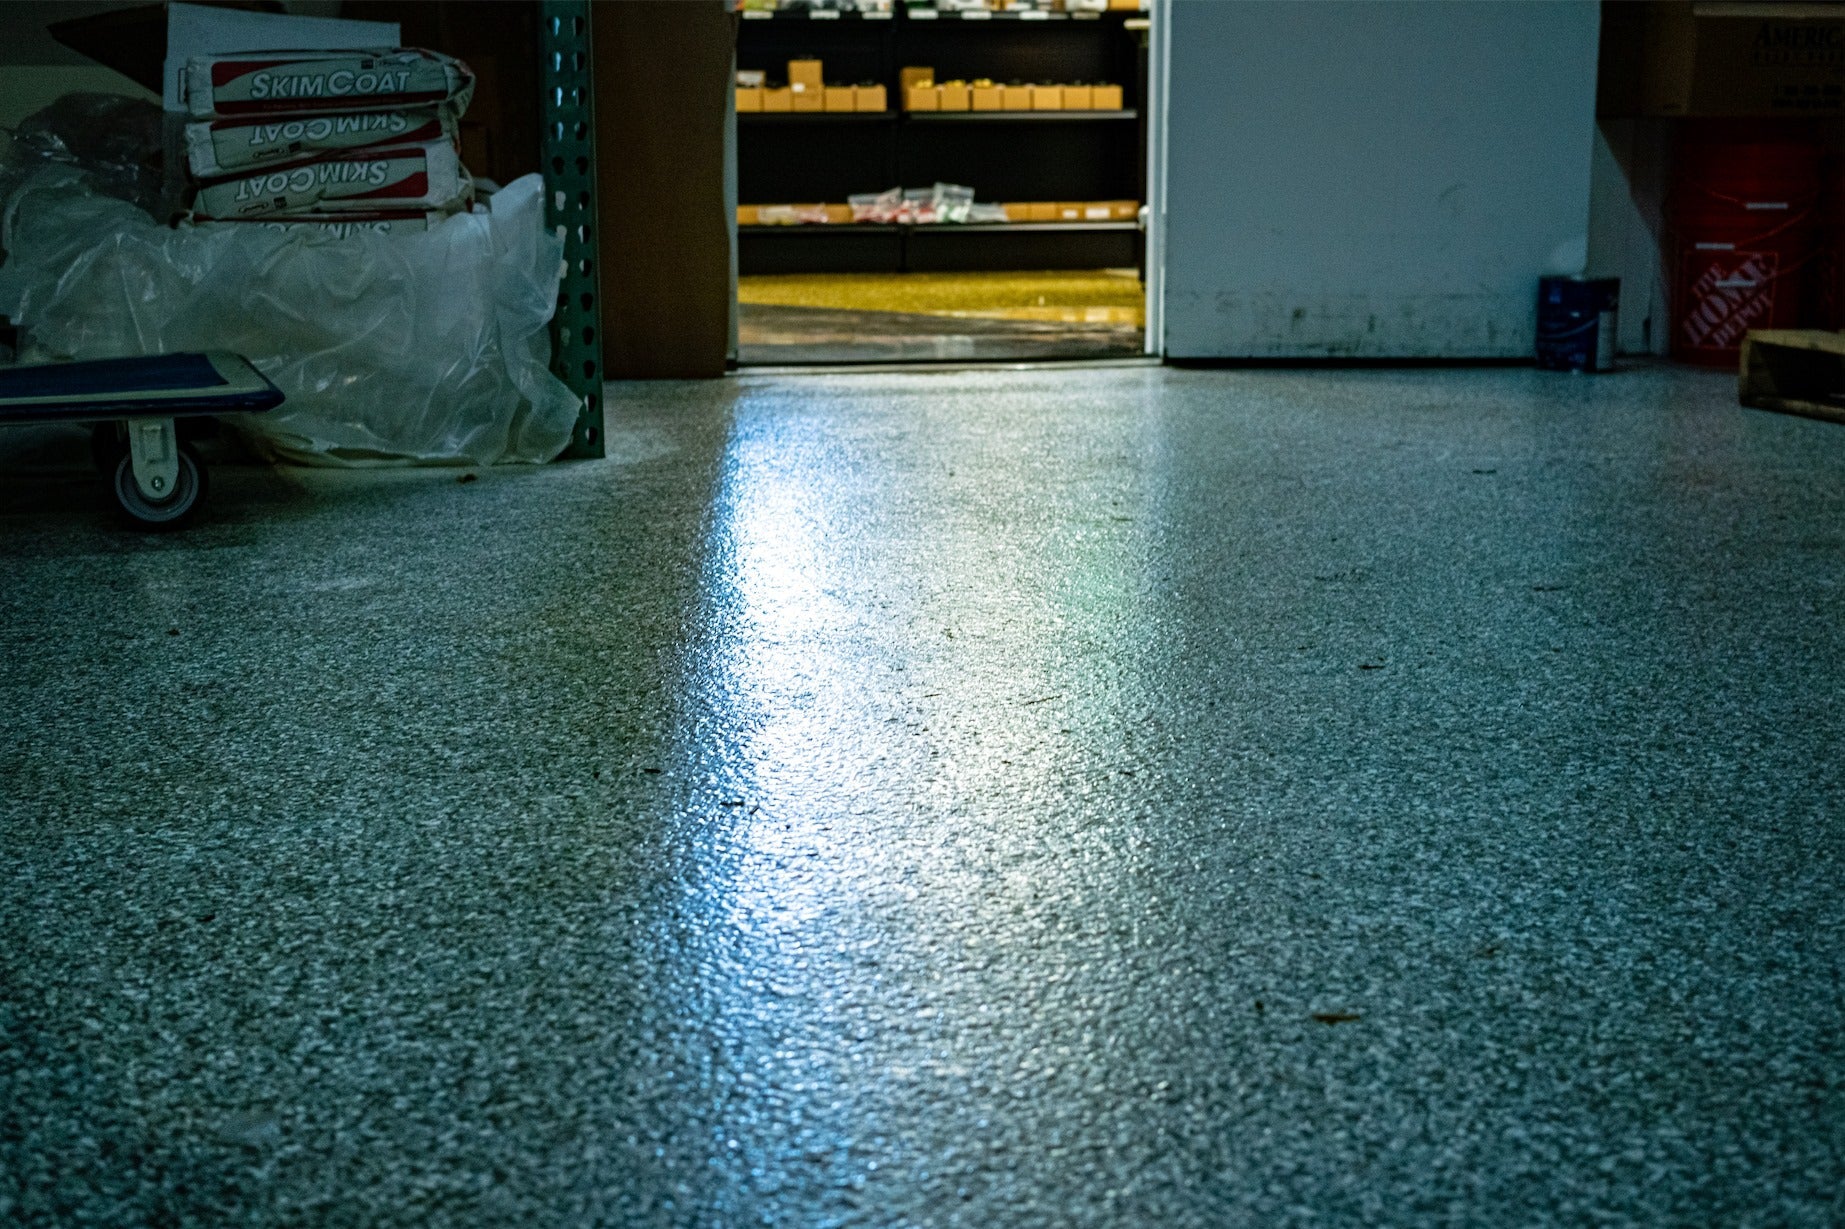 Does my Garage Floor Need an Epoxy Moisture Vapor Barrier? - Xtreme Polishing Systems